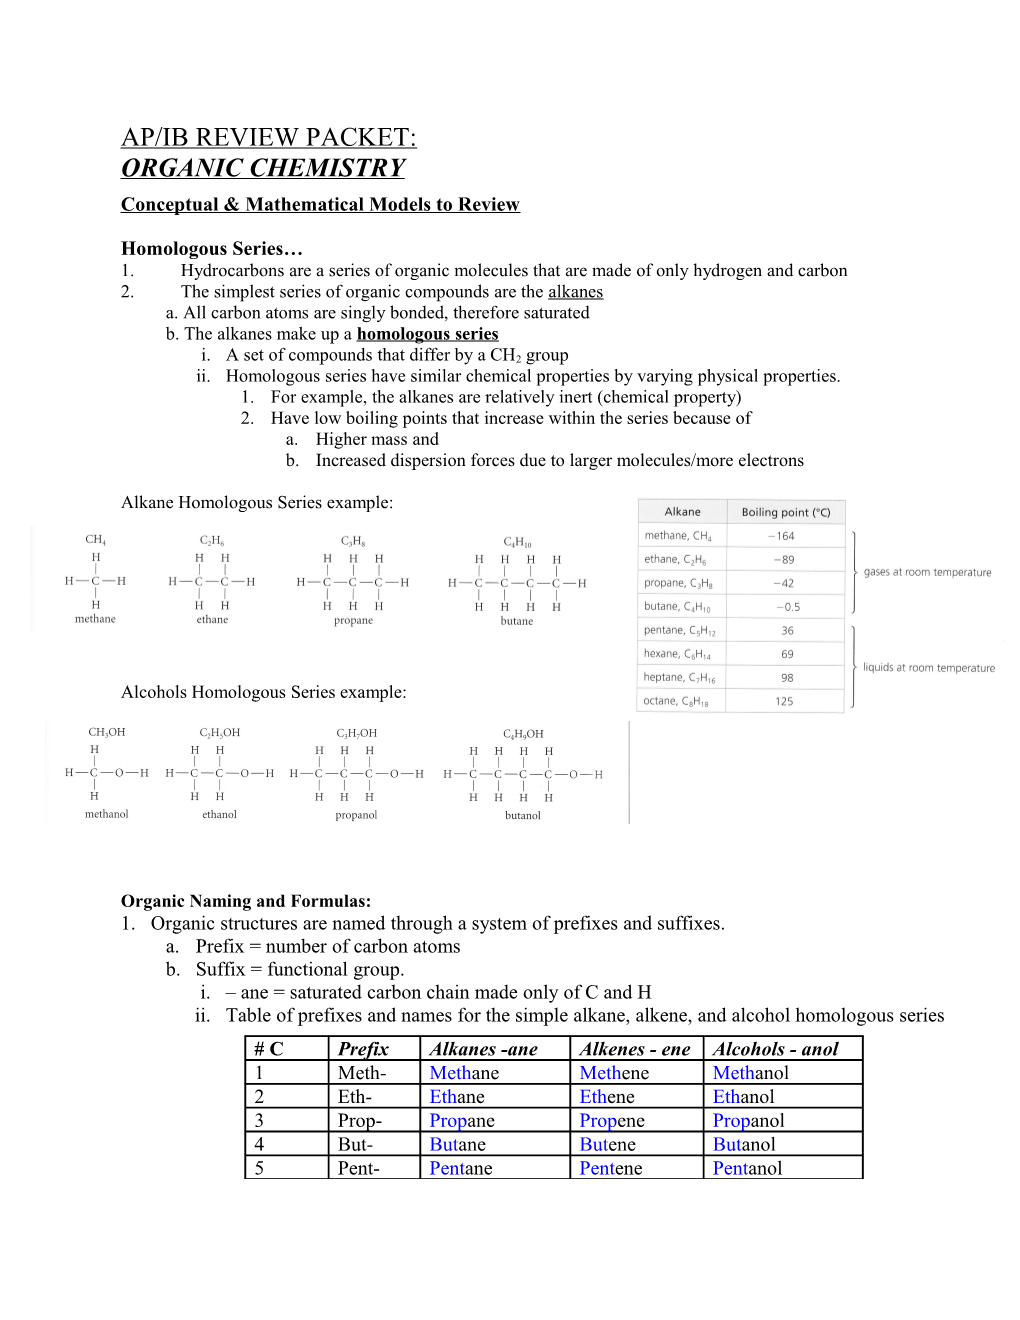 Conceptual & Mathematical Models to Review